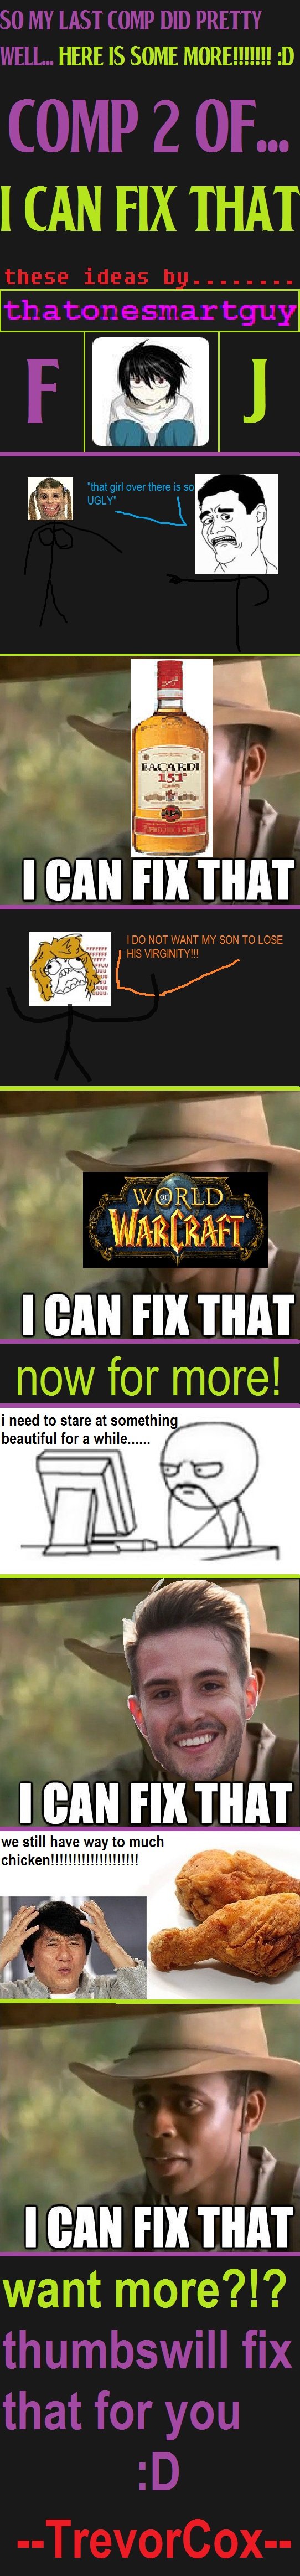 I Can Fix That 2!. new meme i made. hope you like it :p first: . I CAN FIX THAT I can nu nun I CAN Fill THAT e i wyt m h chic I I BAN FIX THAT want more?!?. This was funny.